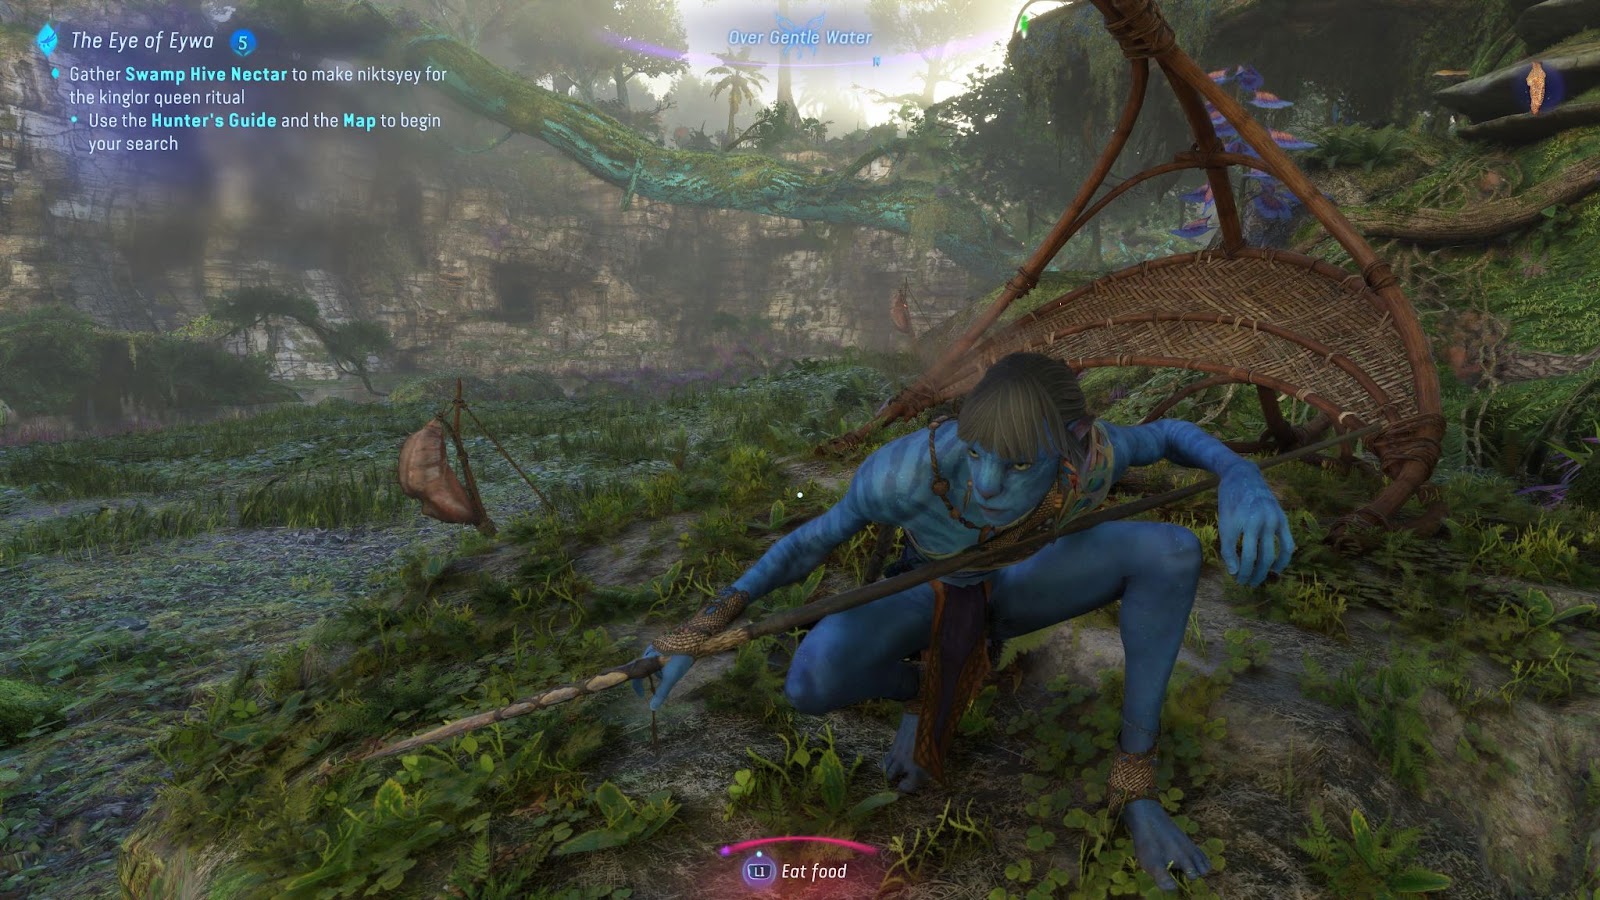 An in game screenshot of a Na'vi in the game Avatar: Frontiers of Pandora